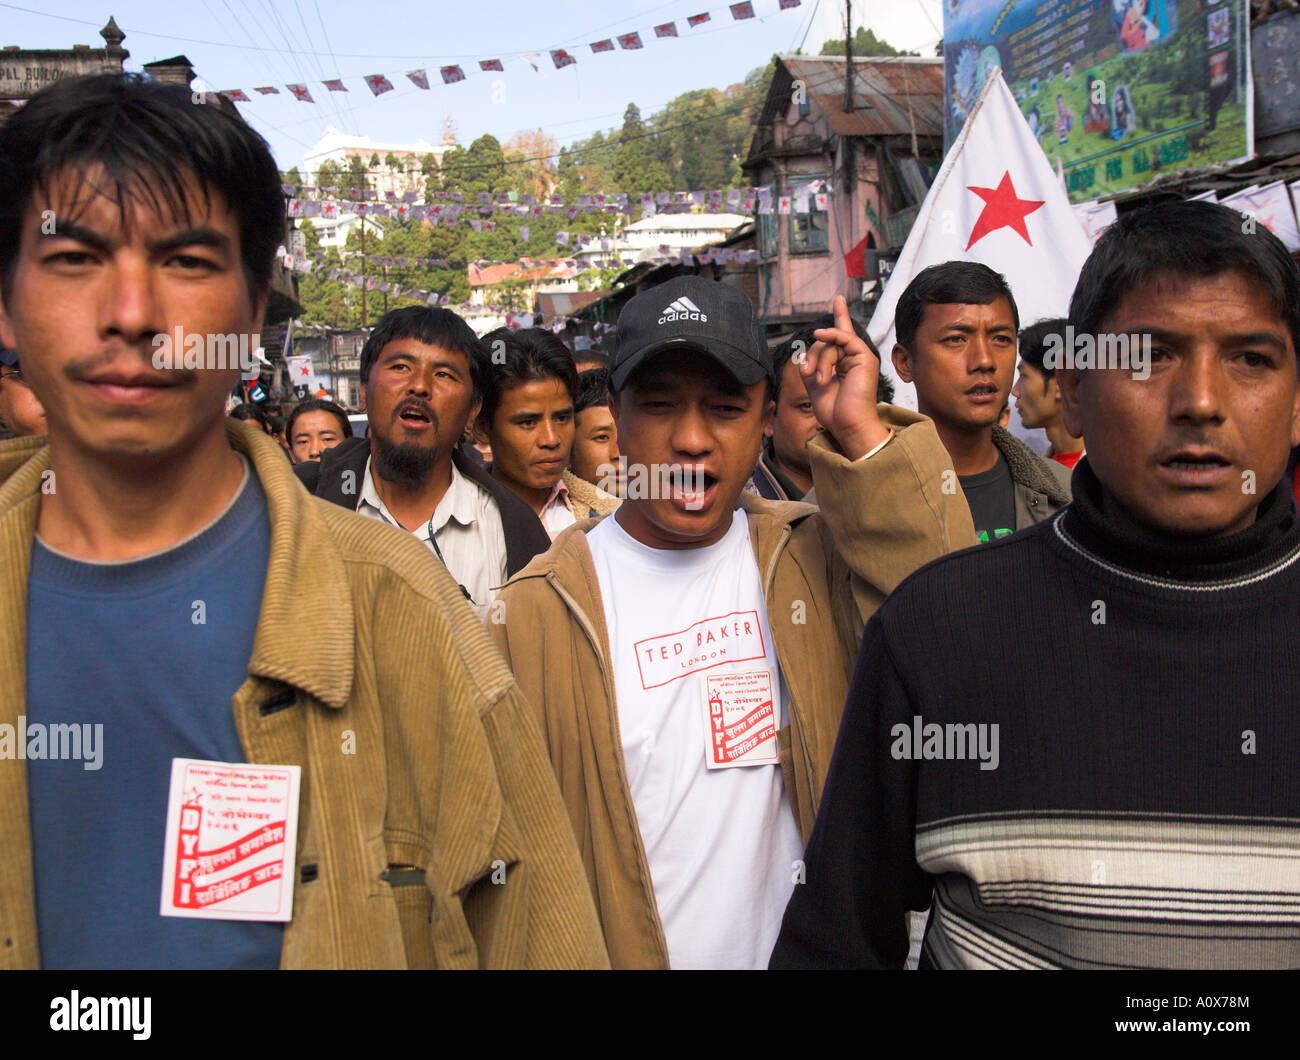 India West Bengal Darjeeling maoist demonstration in the streets of darjeeling group of men marching and yelling slogans Stock Photo